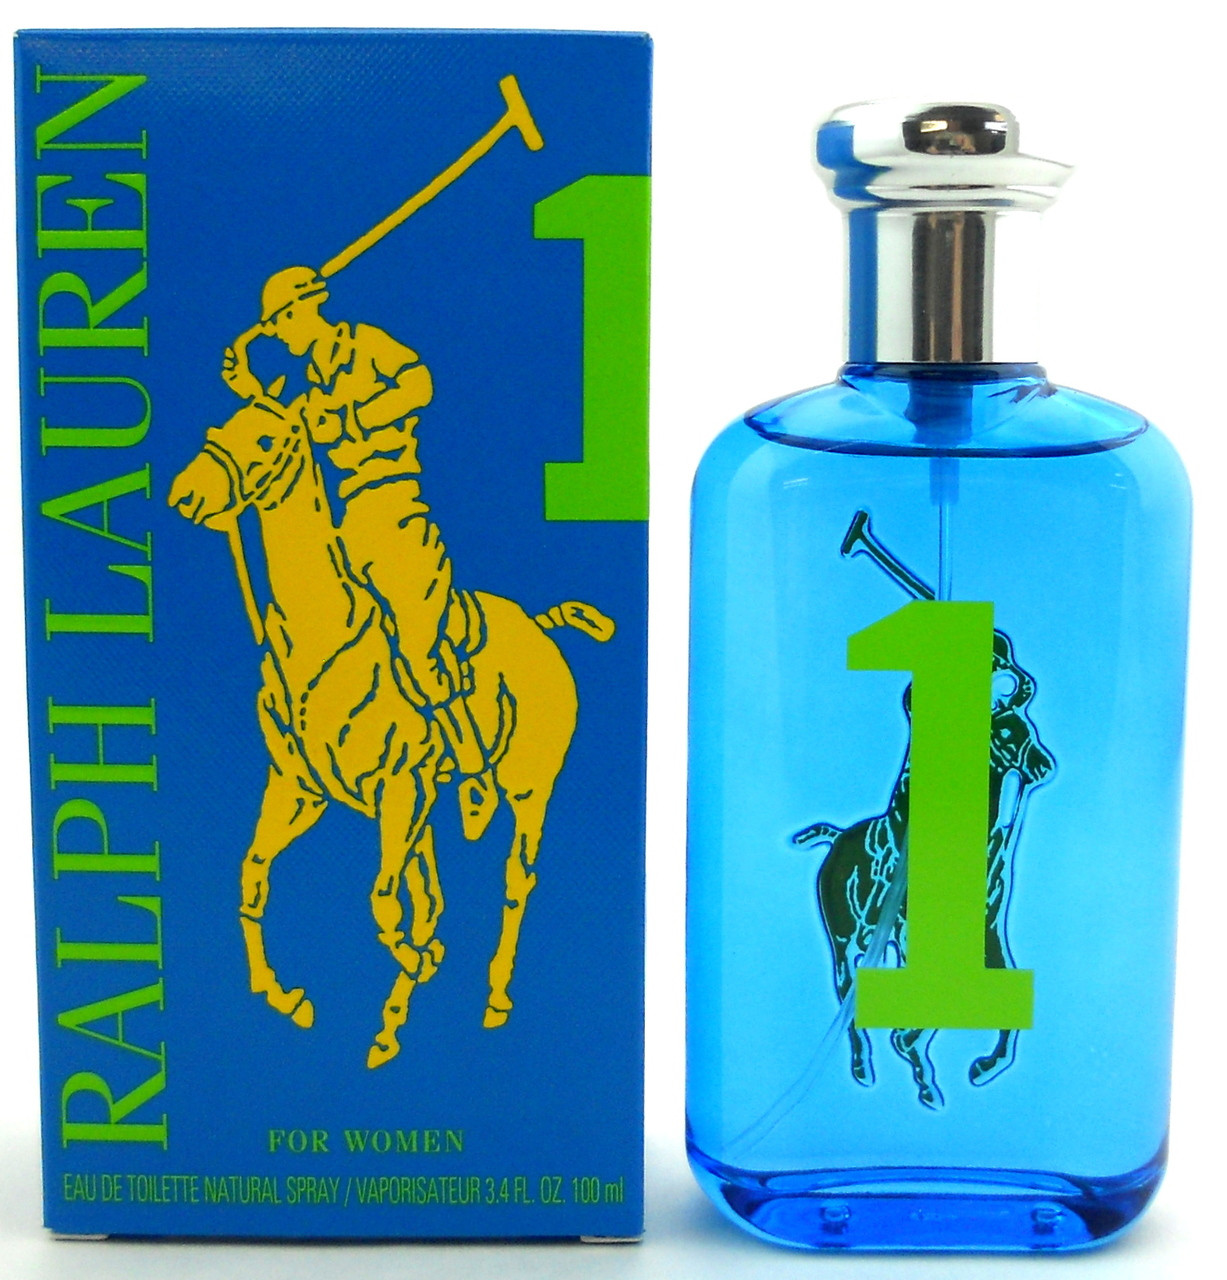 Polo Big Pony #1 (Blue) by Ralph Lauren for Women EDT Spray 3.4 oz. No  Cellophane.Slight Damaged.New - eDiscountPerfumes.com -FREE SHIPPING* From  An Independent Seller of 100% Authentic Brands Since 1979 (*standard